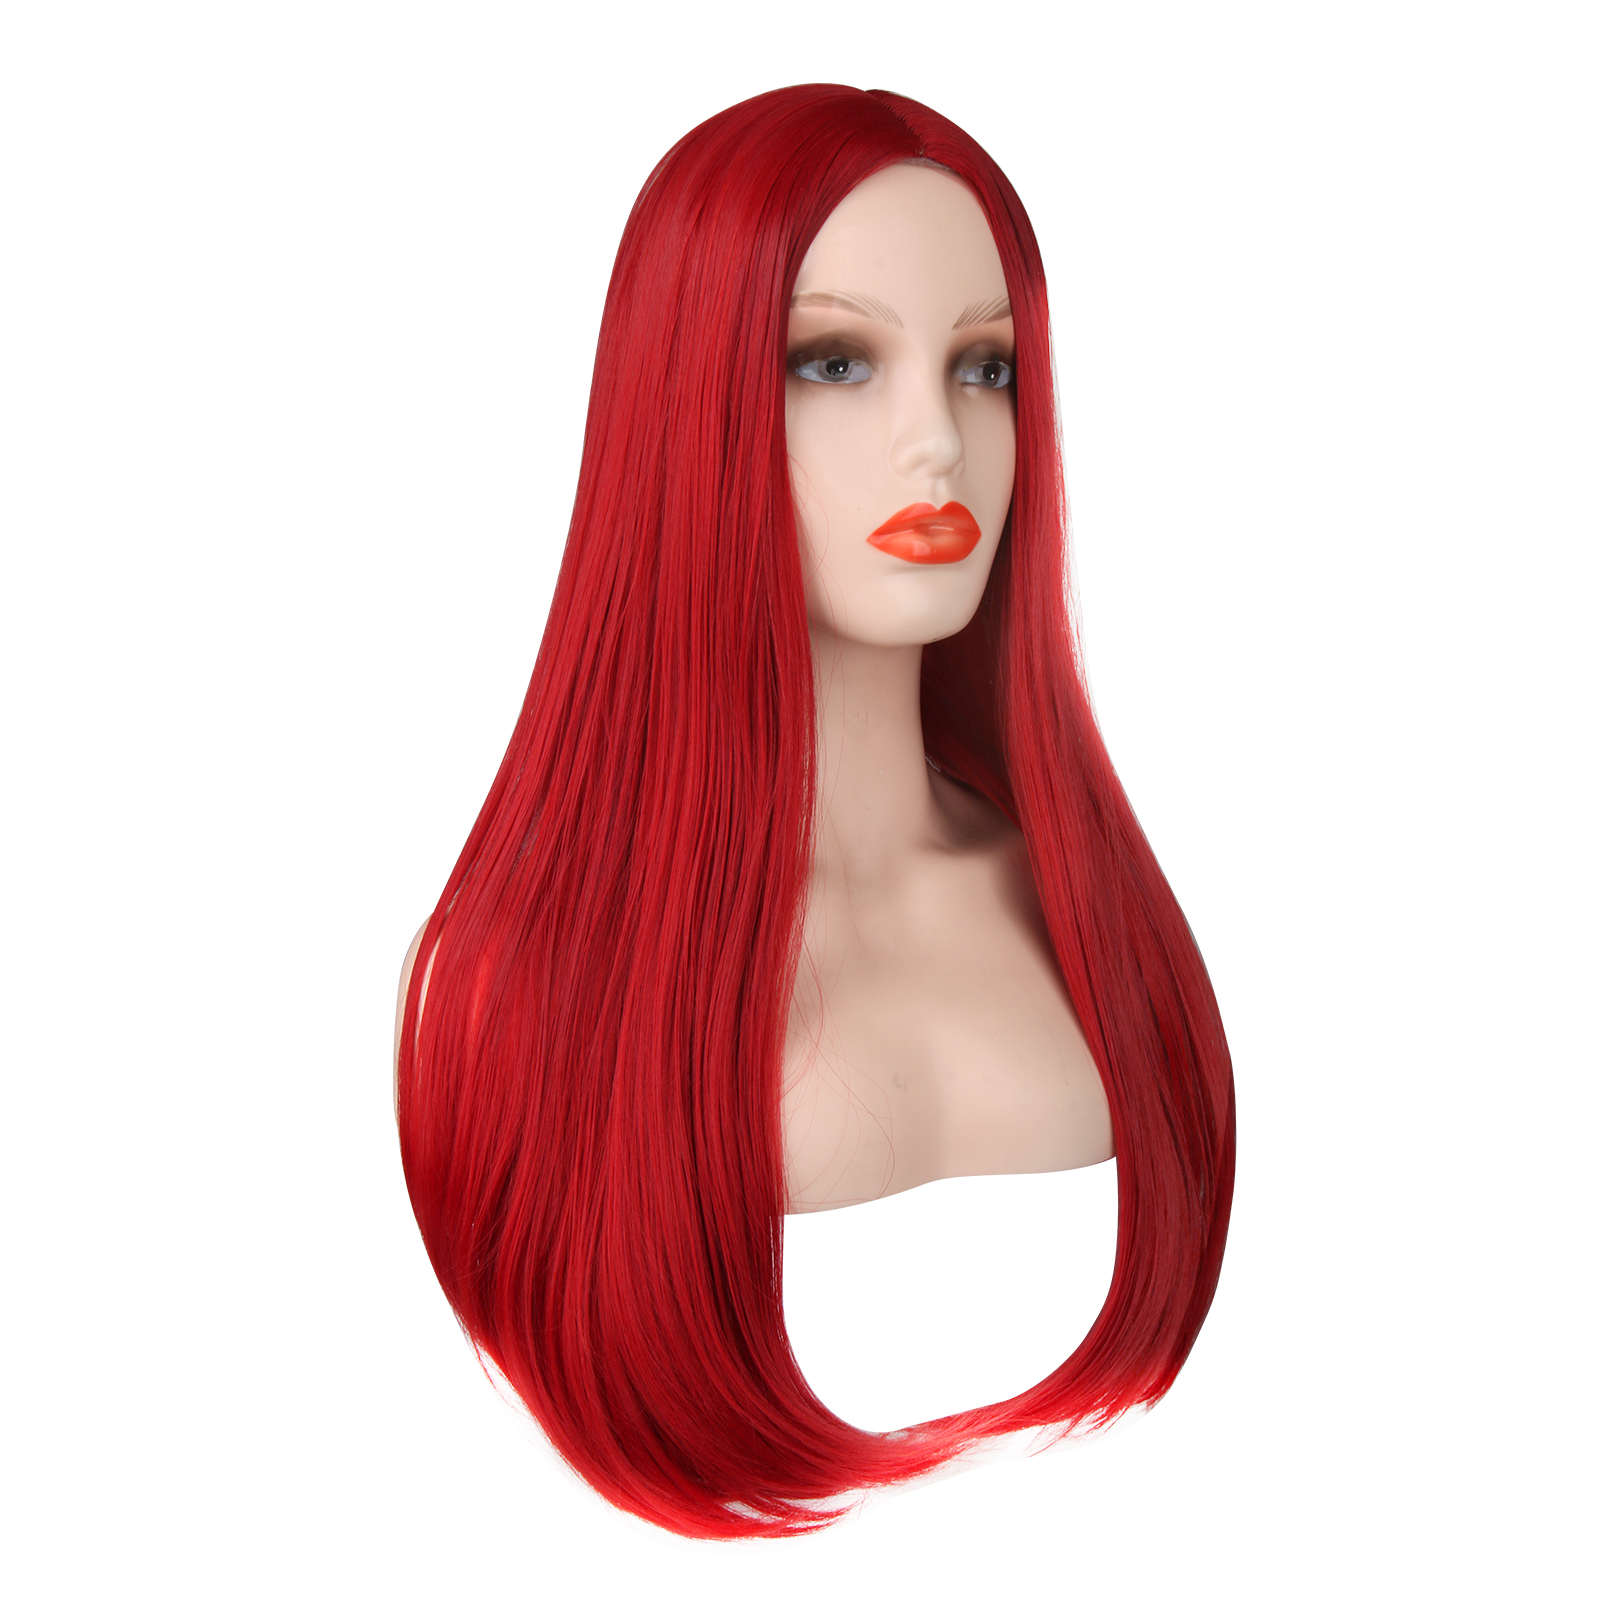 Game Sally Face Wig Halloween Sally Costume Straight Red Hair Takerlama